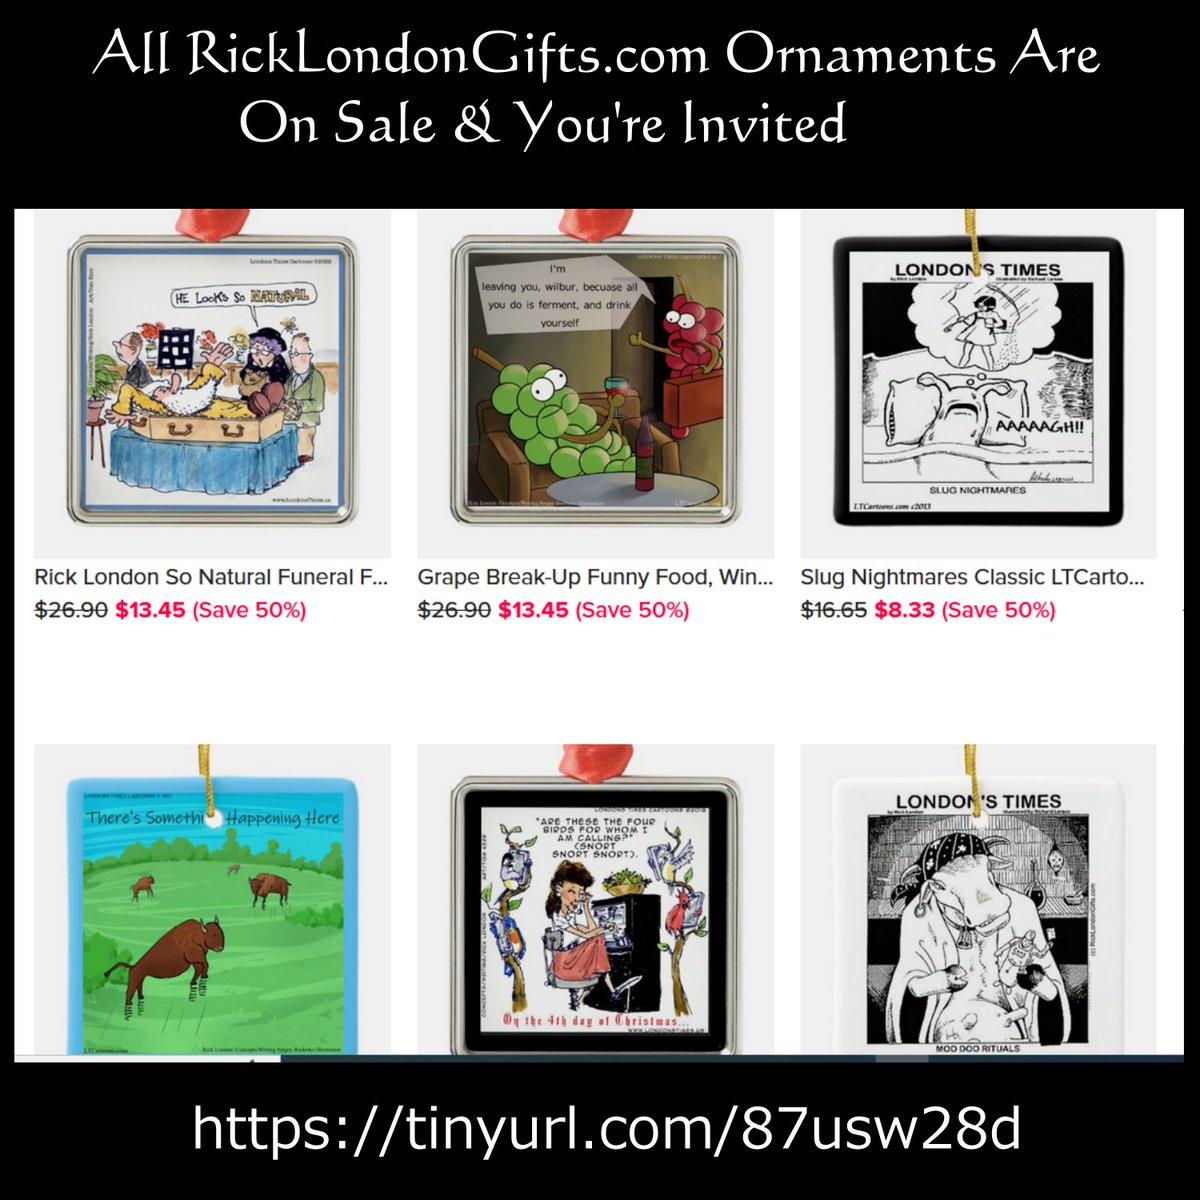 Last Day Up to 40% off #SitewideSale Google #1 ranked #funniest  @RickLondon #Giftshop #freepersonalization #shipsworldwide #funnygifts #funnycards #Shop from #comfort of #home @zazzle #guaranteed Use #code ZAZMAKEITALL @c/o  RickLondonGifts.com